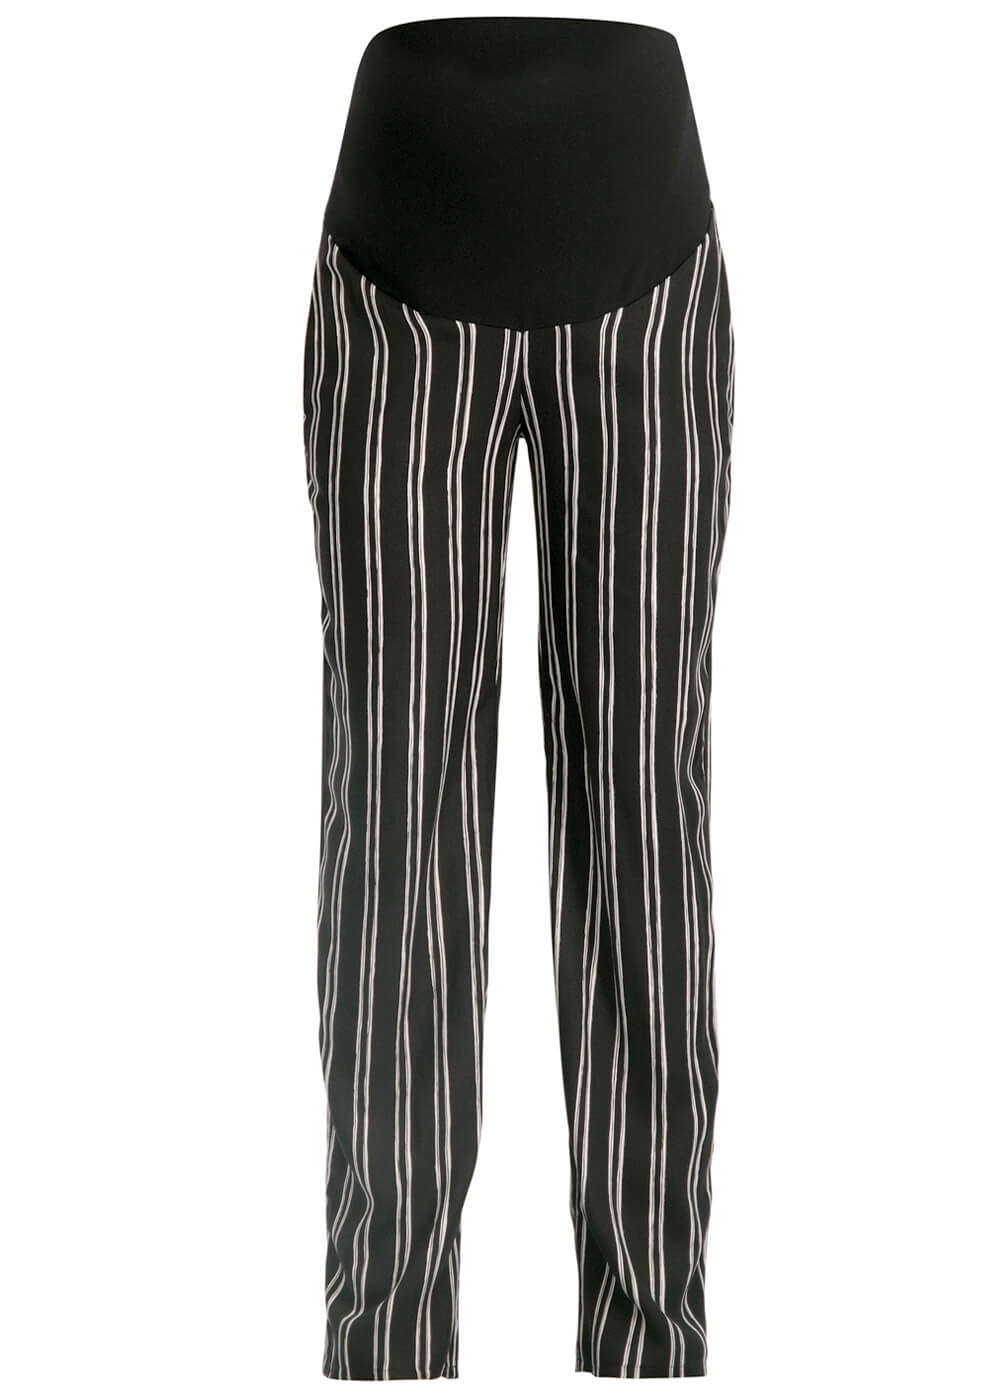 Queen mum Black Striped Maternity Trousers | Queen Bee